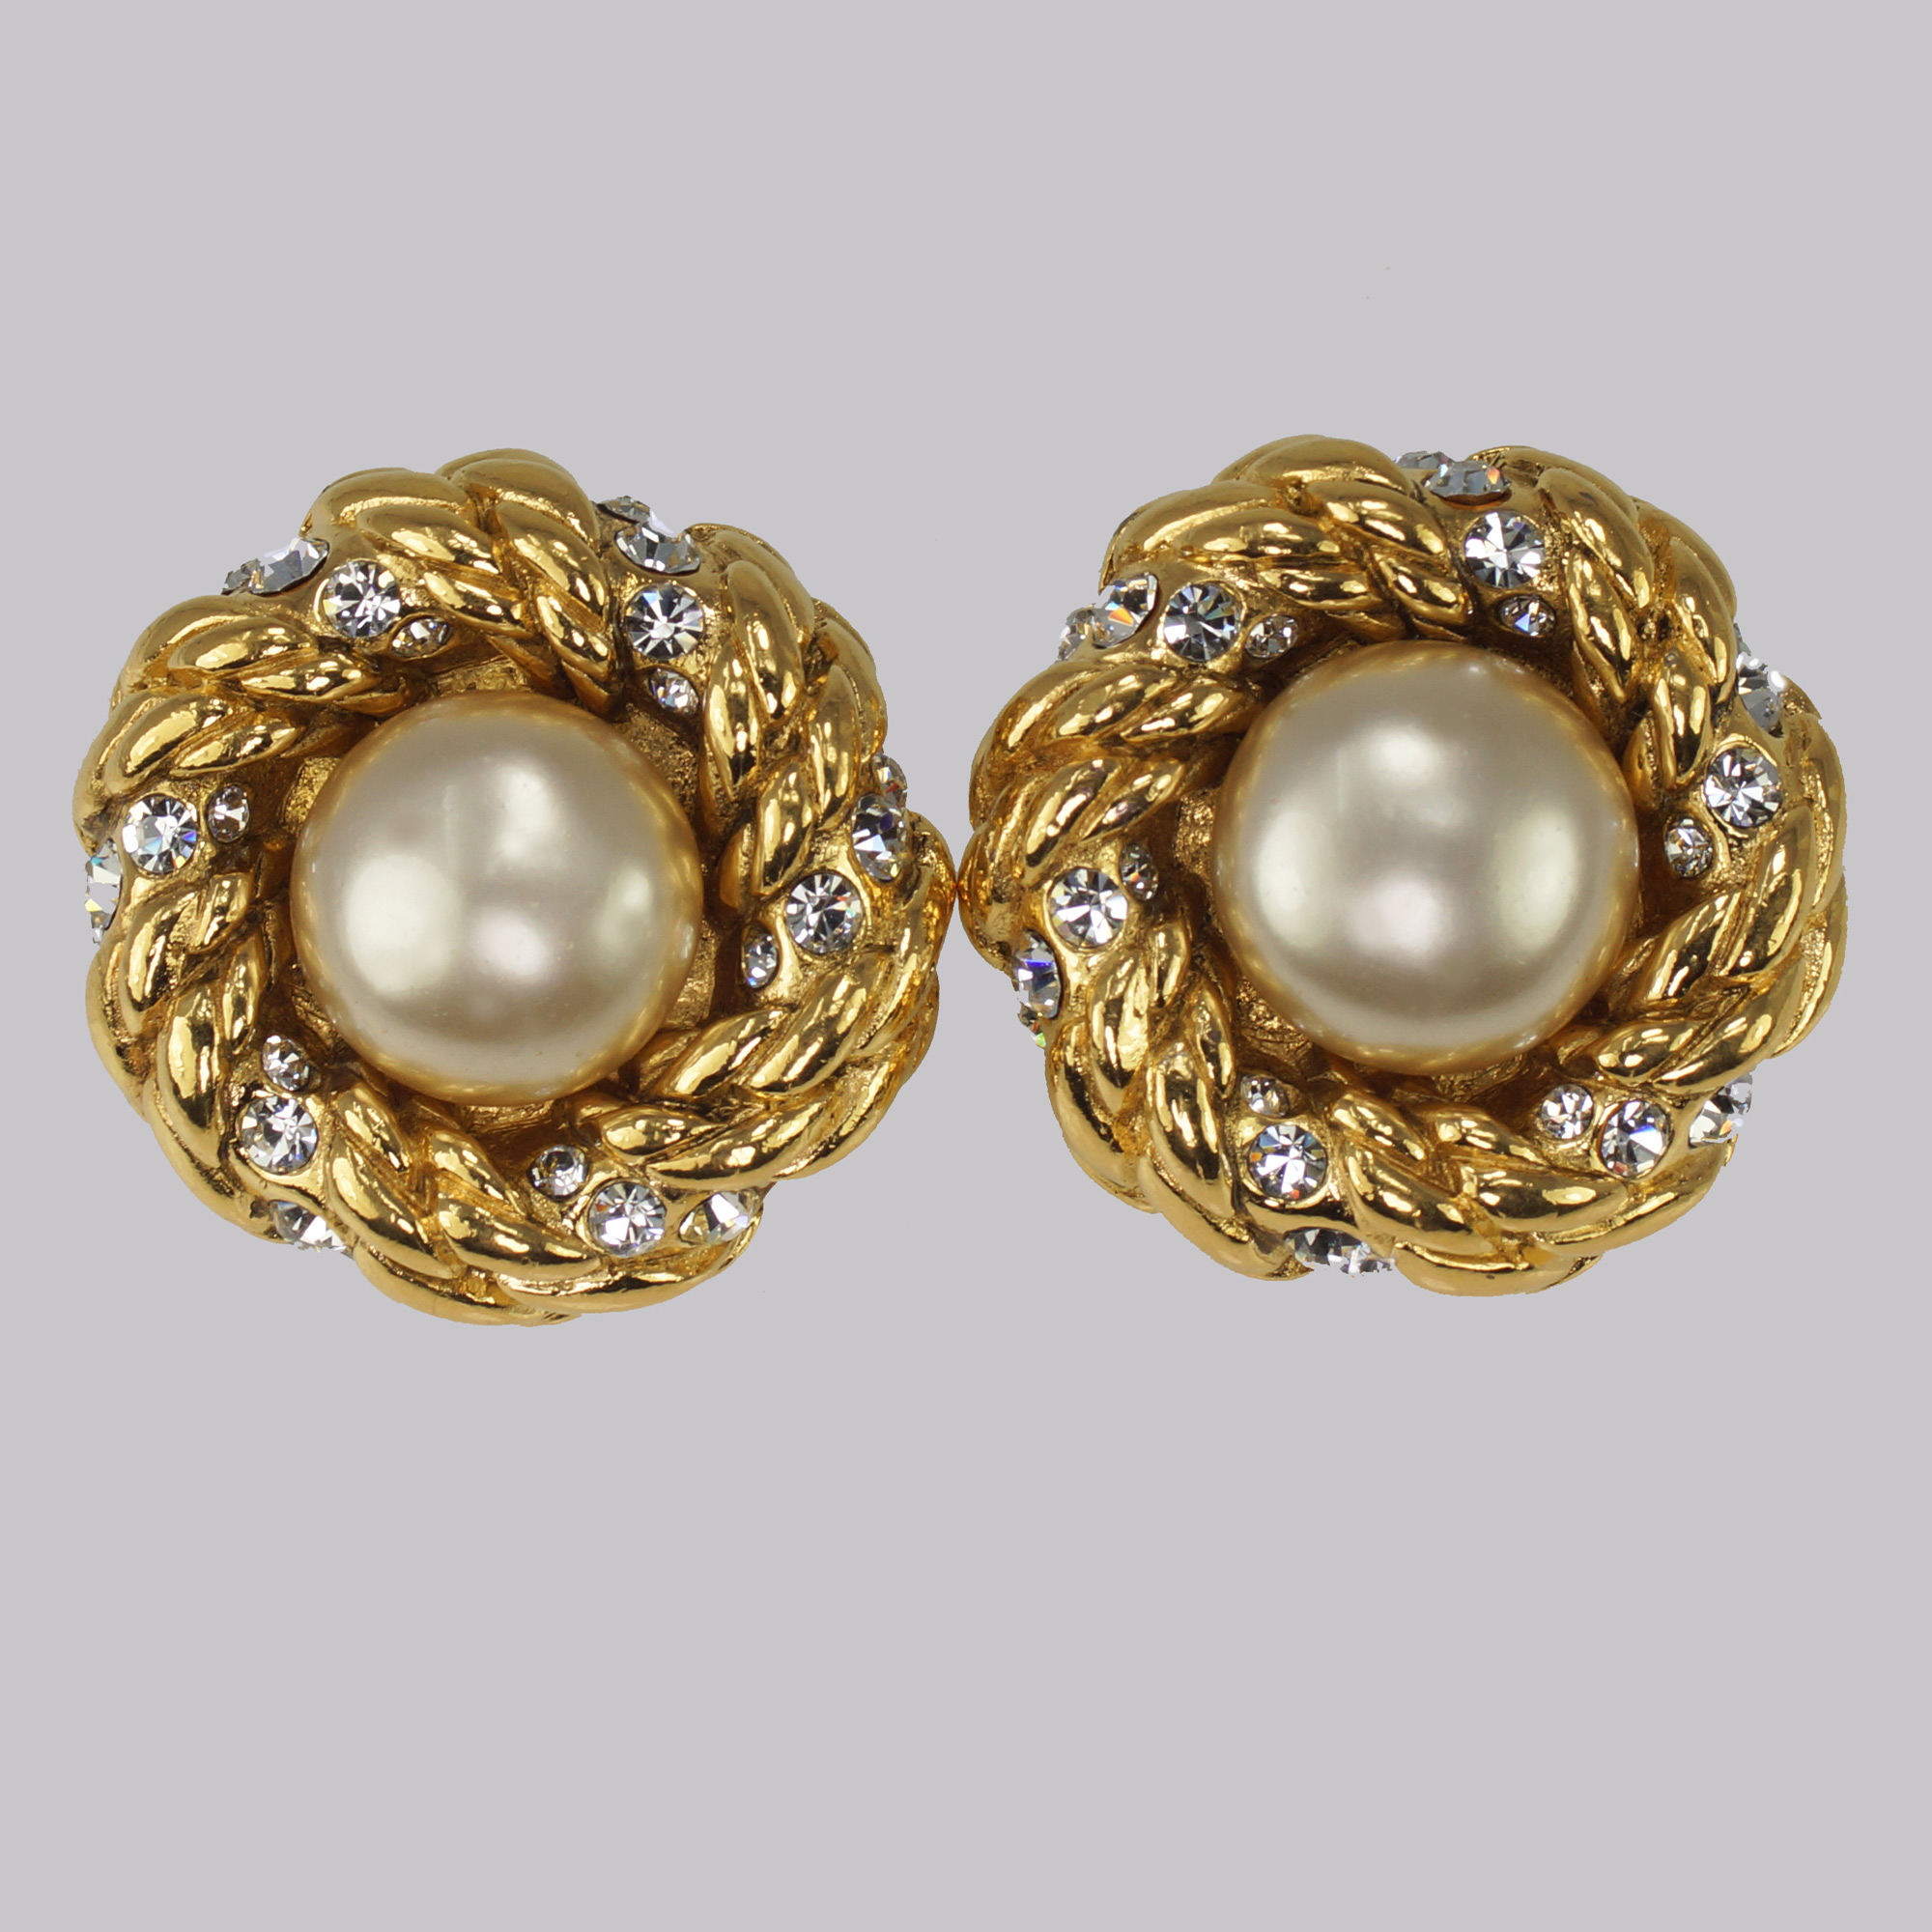 Chanel Gold  Pearl Drop Earrings  Elite HNW  High End Watches Jewellery   Art Boutique